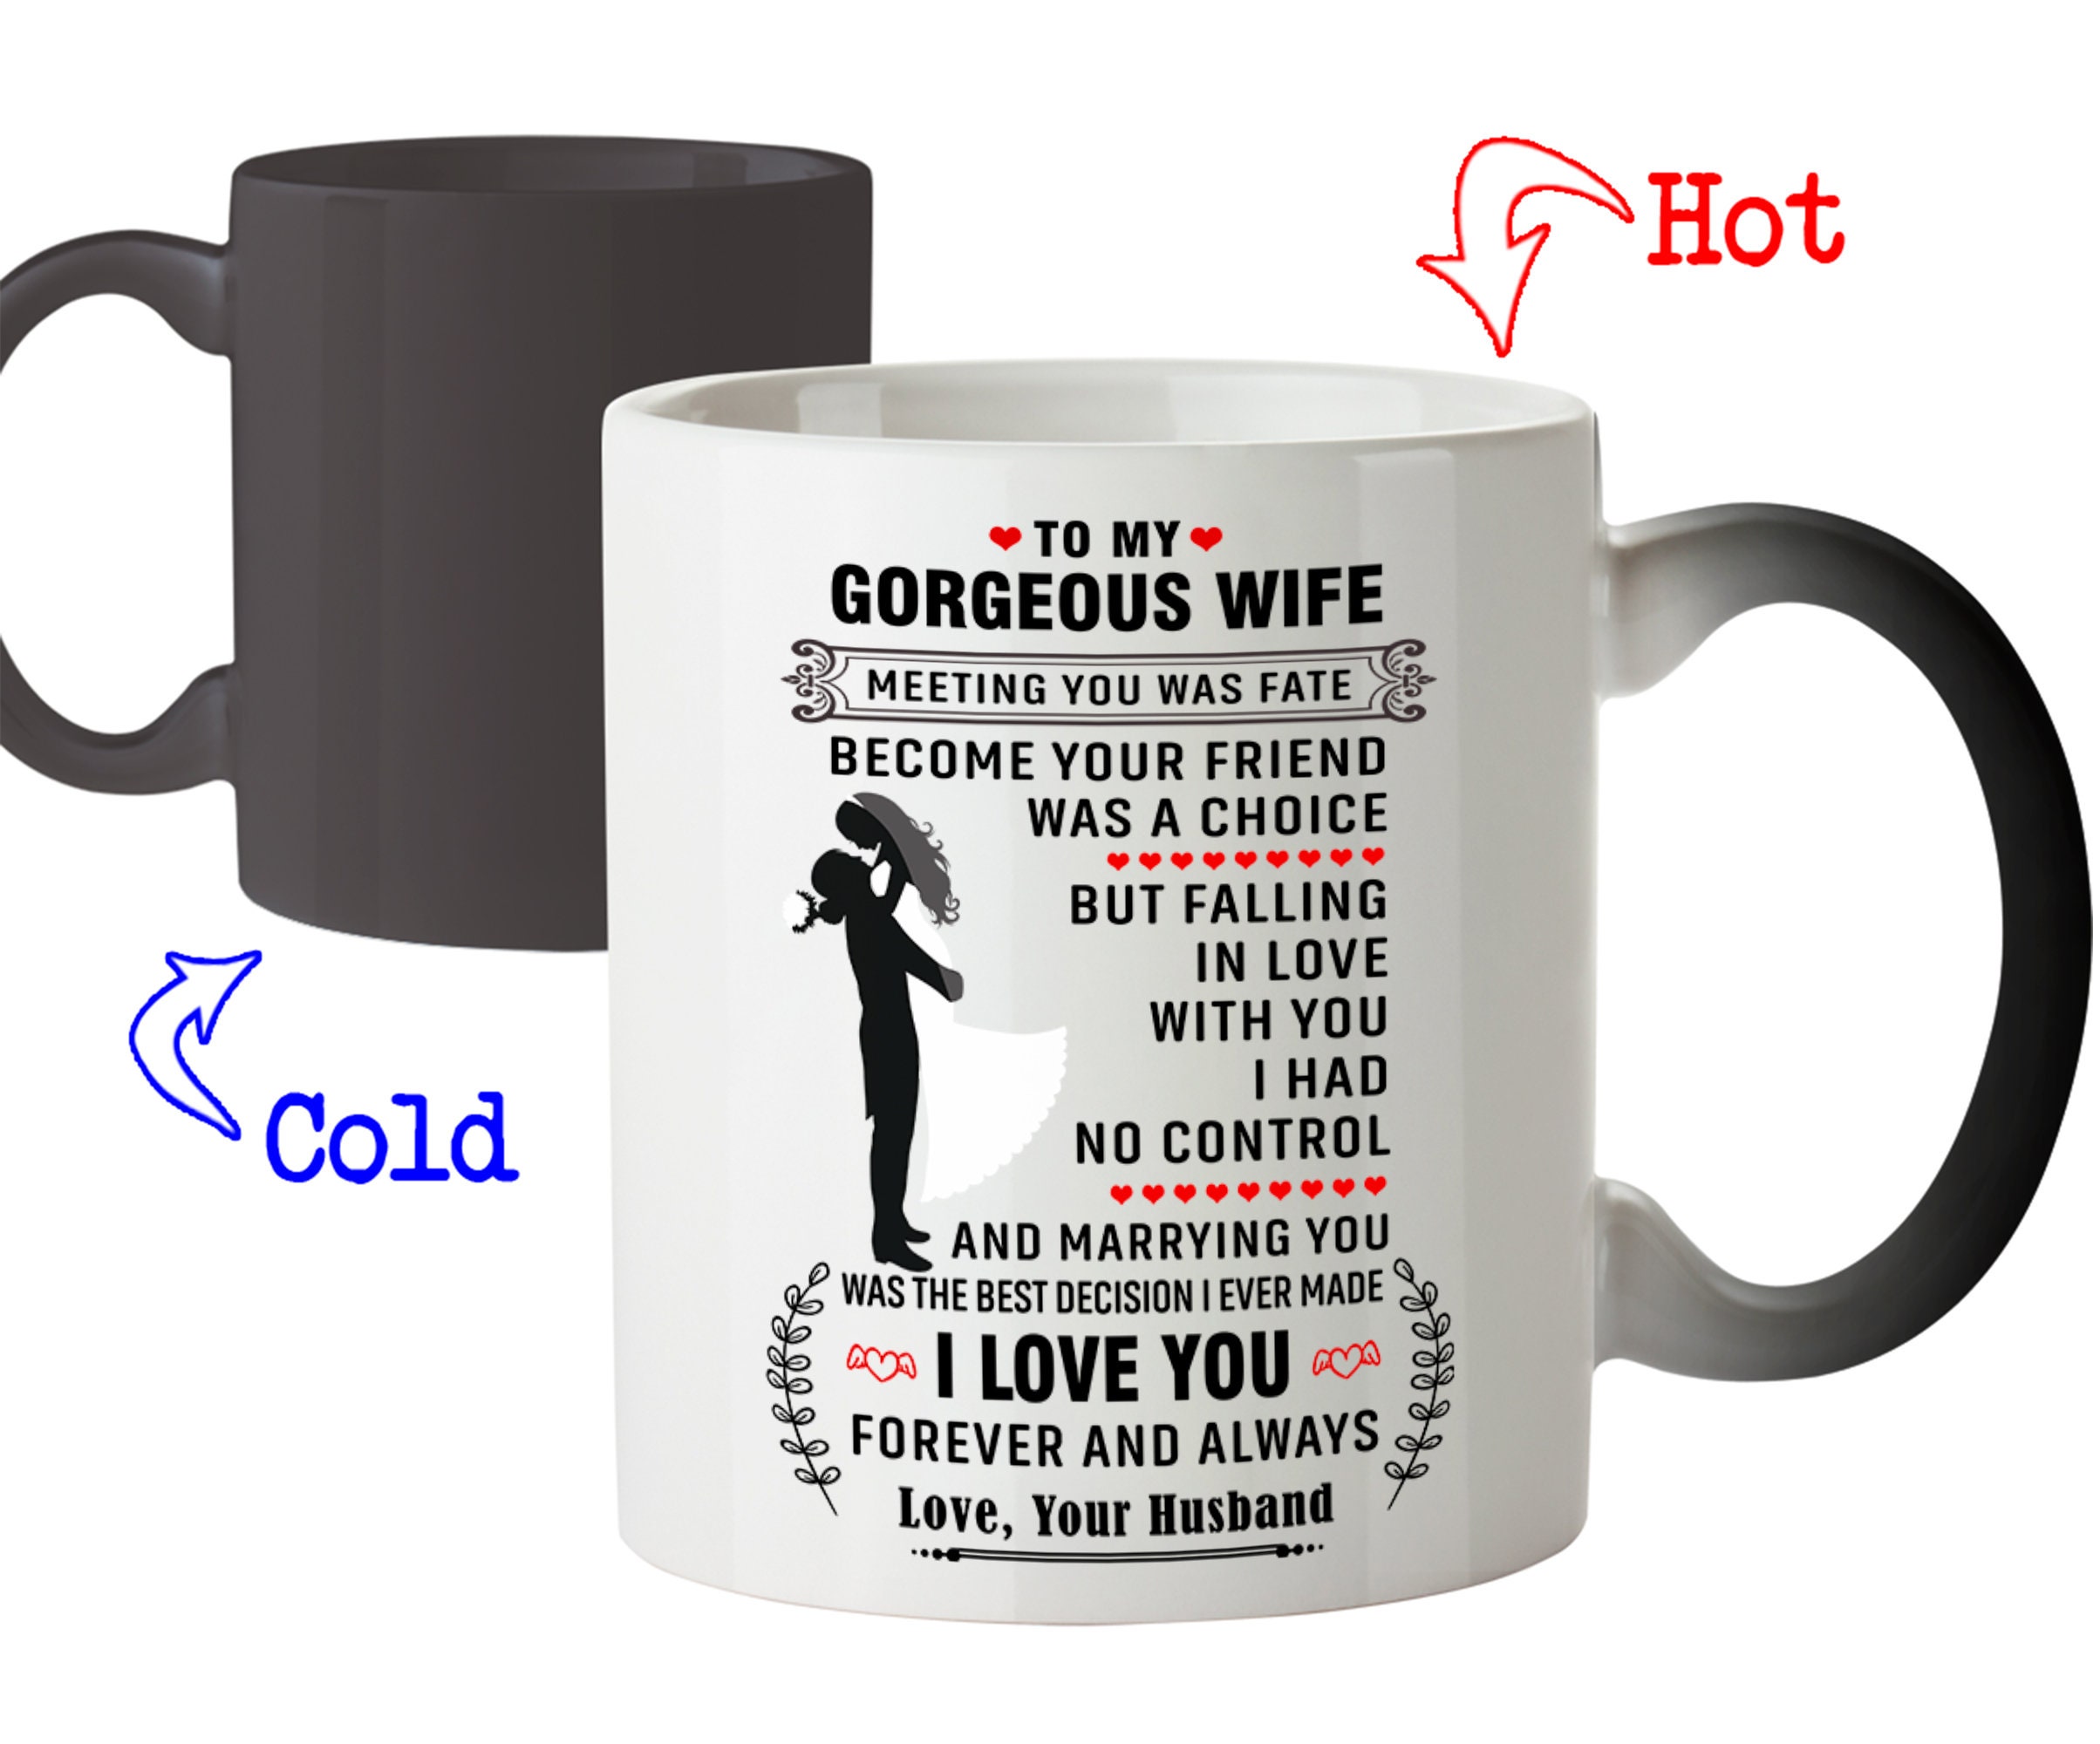 Coffee Mug Love Gift for Wife Love You Forever and Always - Etsy